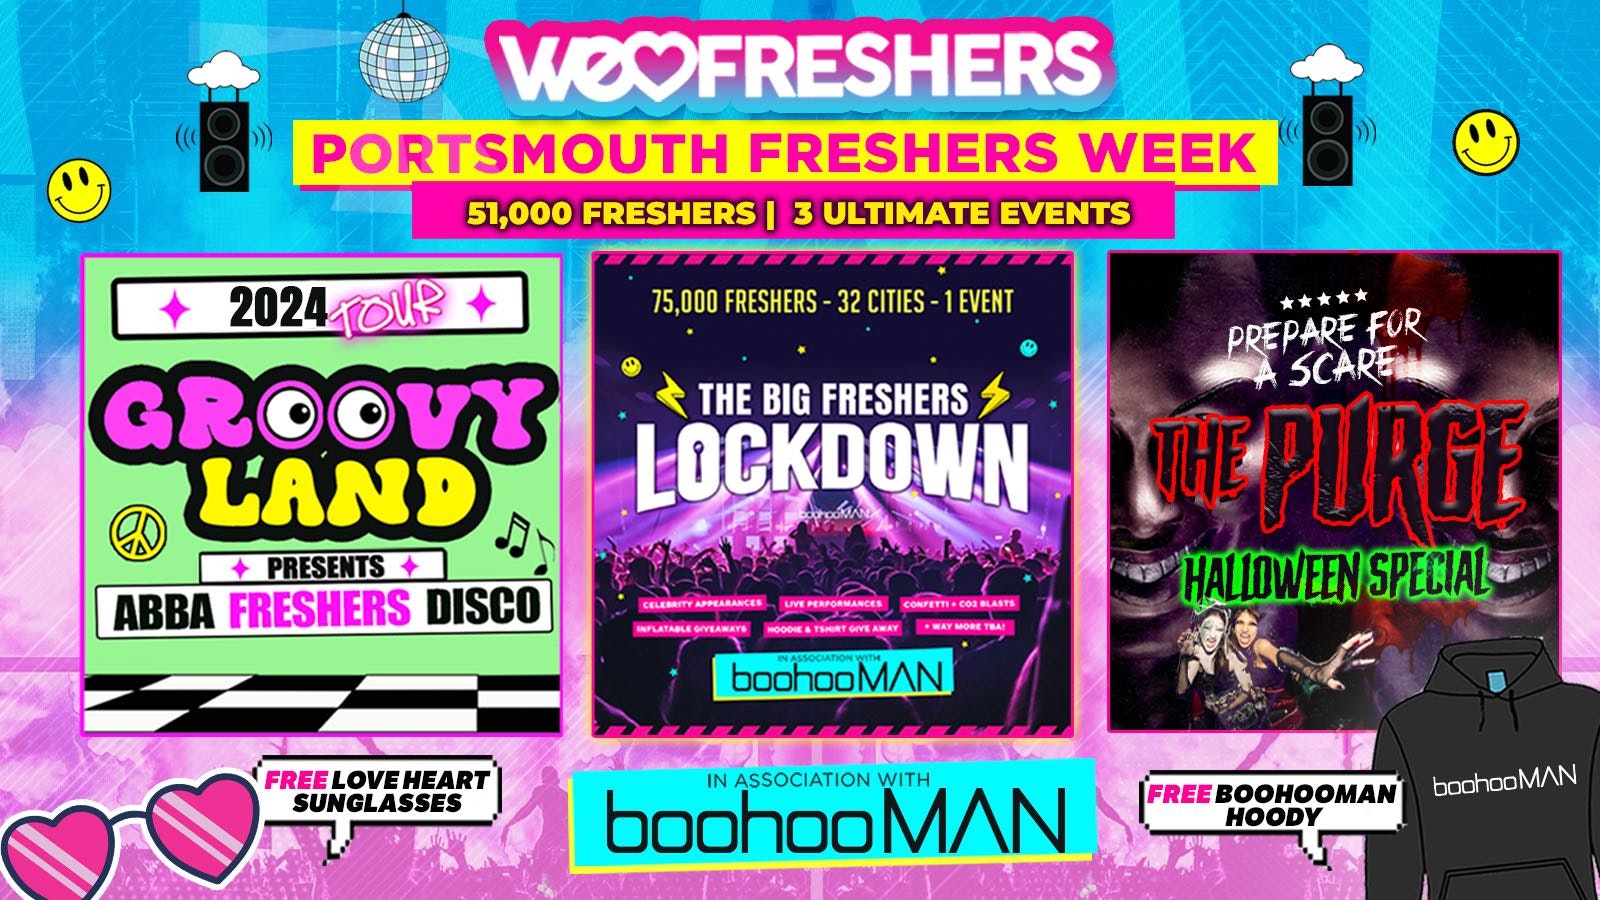 WE LOVE PORTSMOUTH FRESHERS 2024 in association with boohooMAN ❗FREE BOOHOOMAN HOODIE TODAY ONLY❗